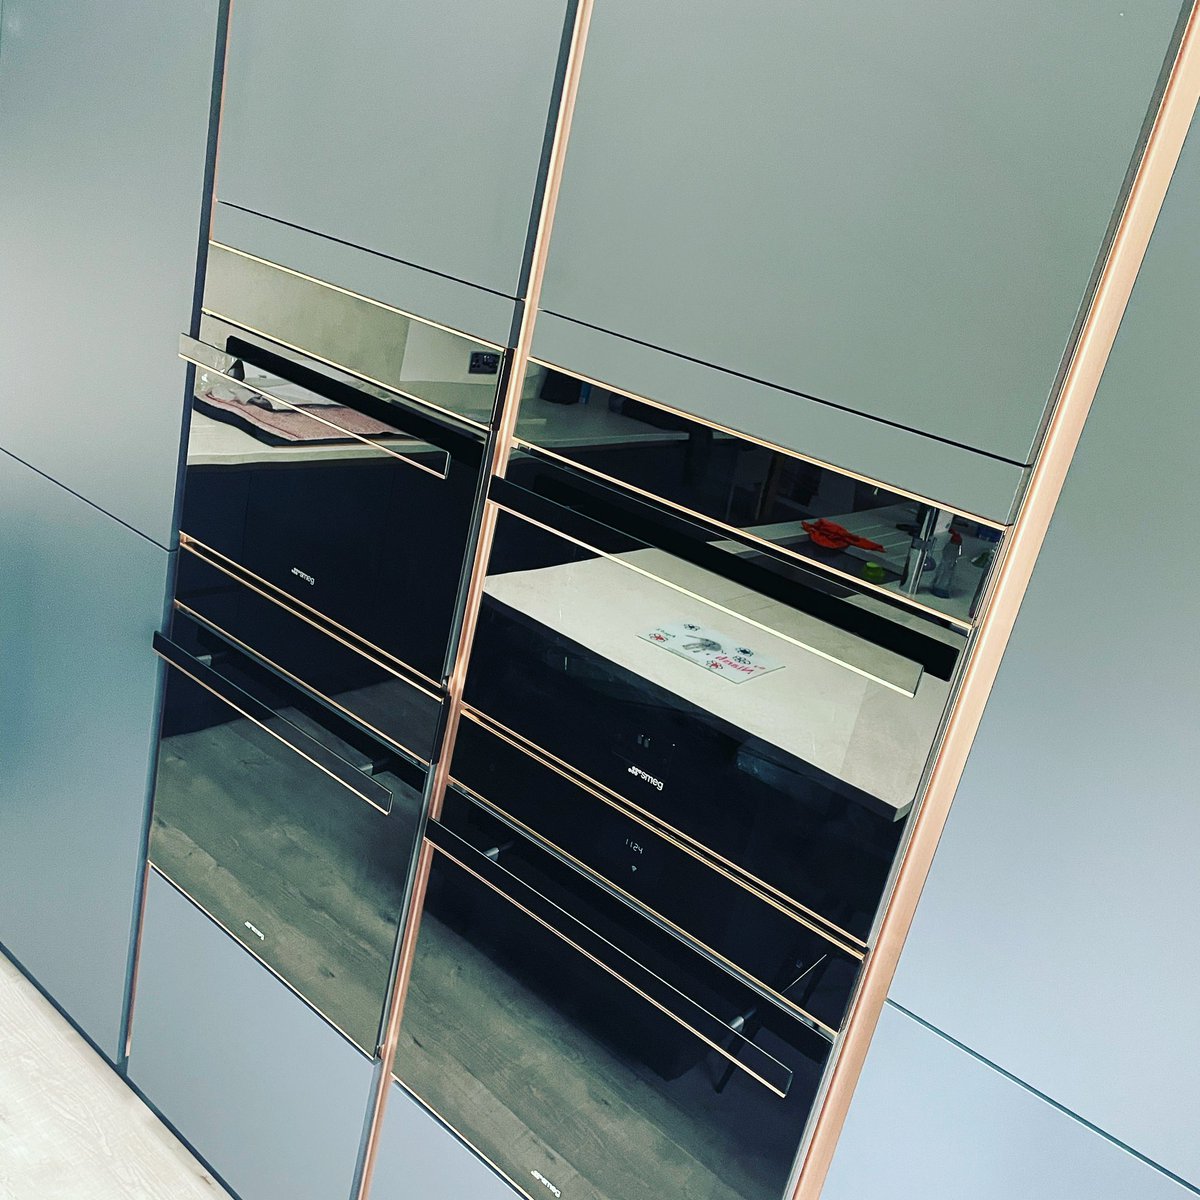 Things you love to see 😍😍, Latest install of Smeg appliances from the Stil Novo Range really complements the Indigo Blue New York range with copper trim finish. #kitchens #cheshirelife #immerse #design